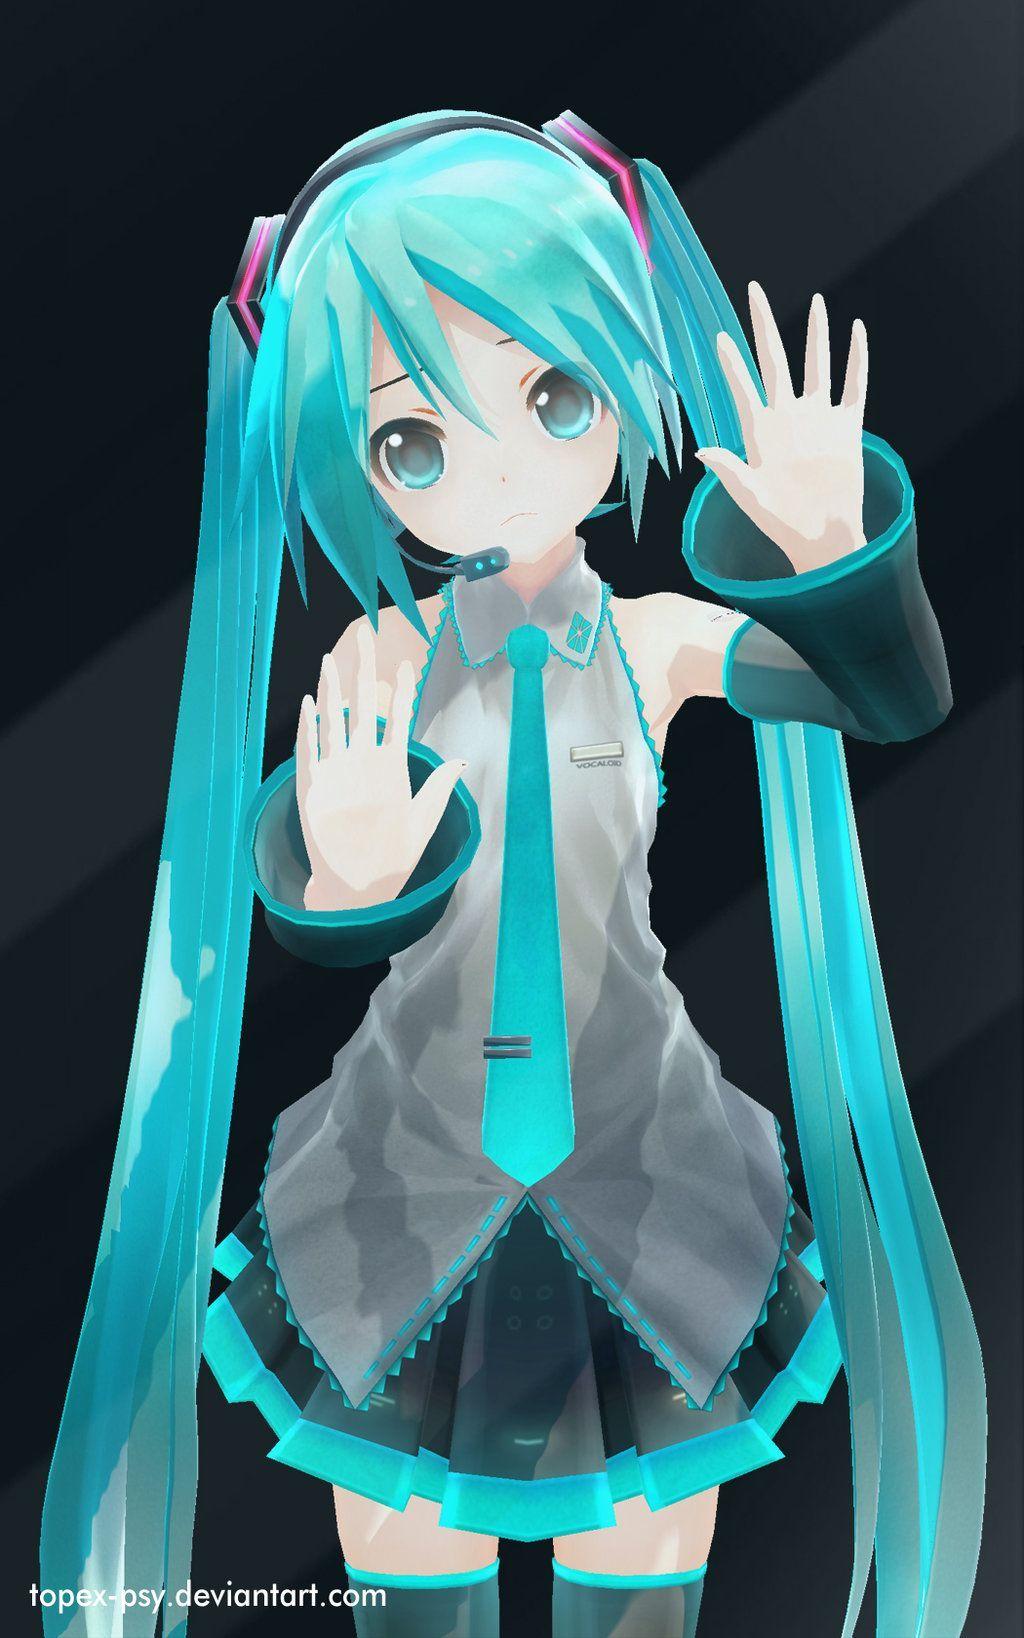 Hatsune Miku Android Wallpapers ...br.pinterest